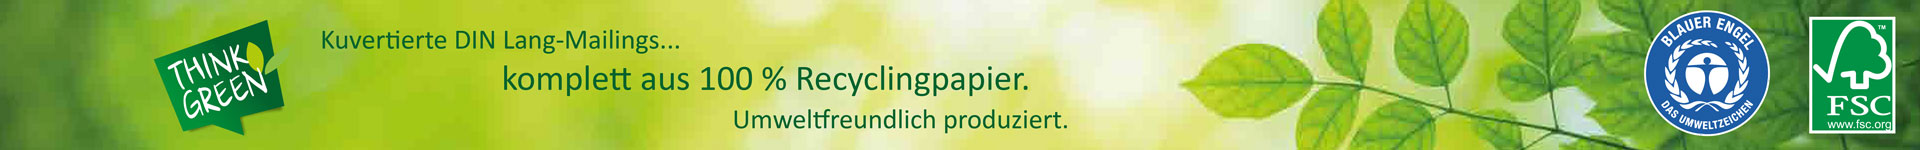 DIN Lang-Recycling-Mailings kuvertiert